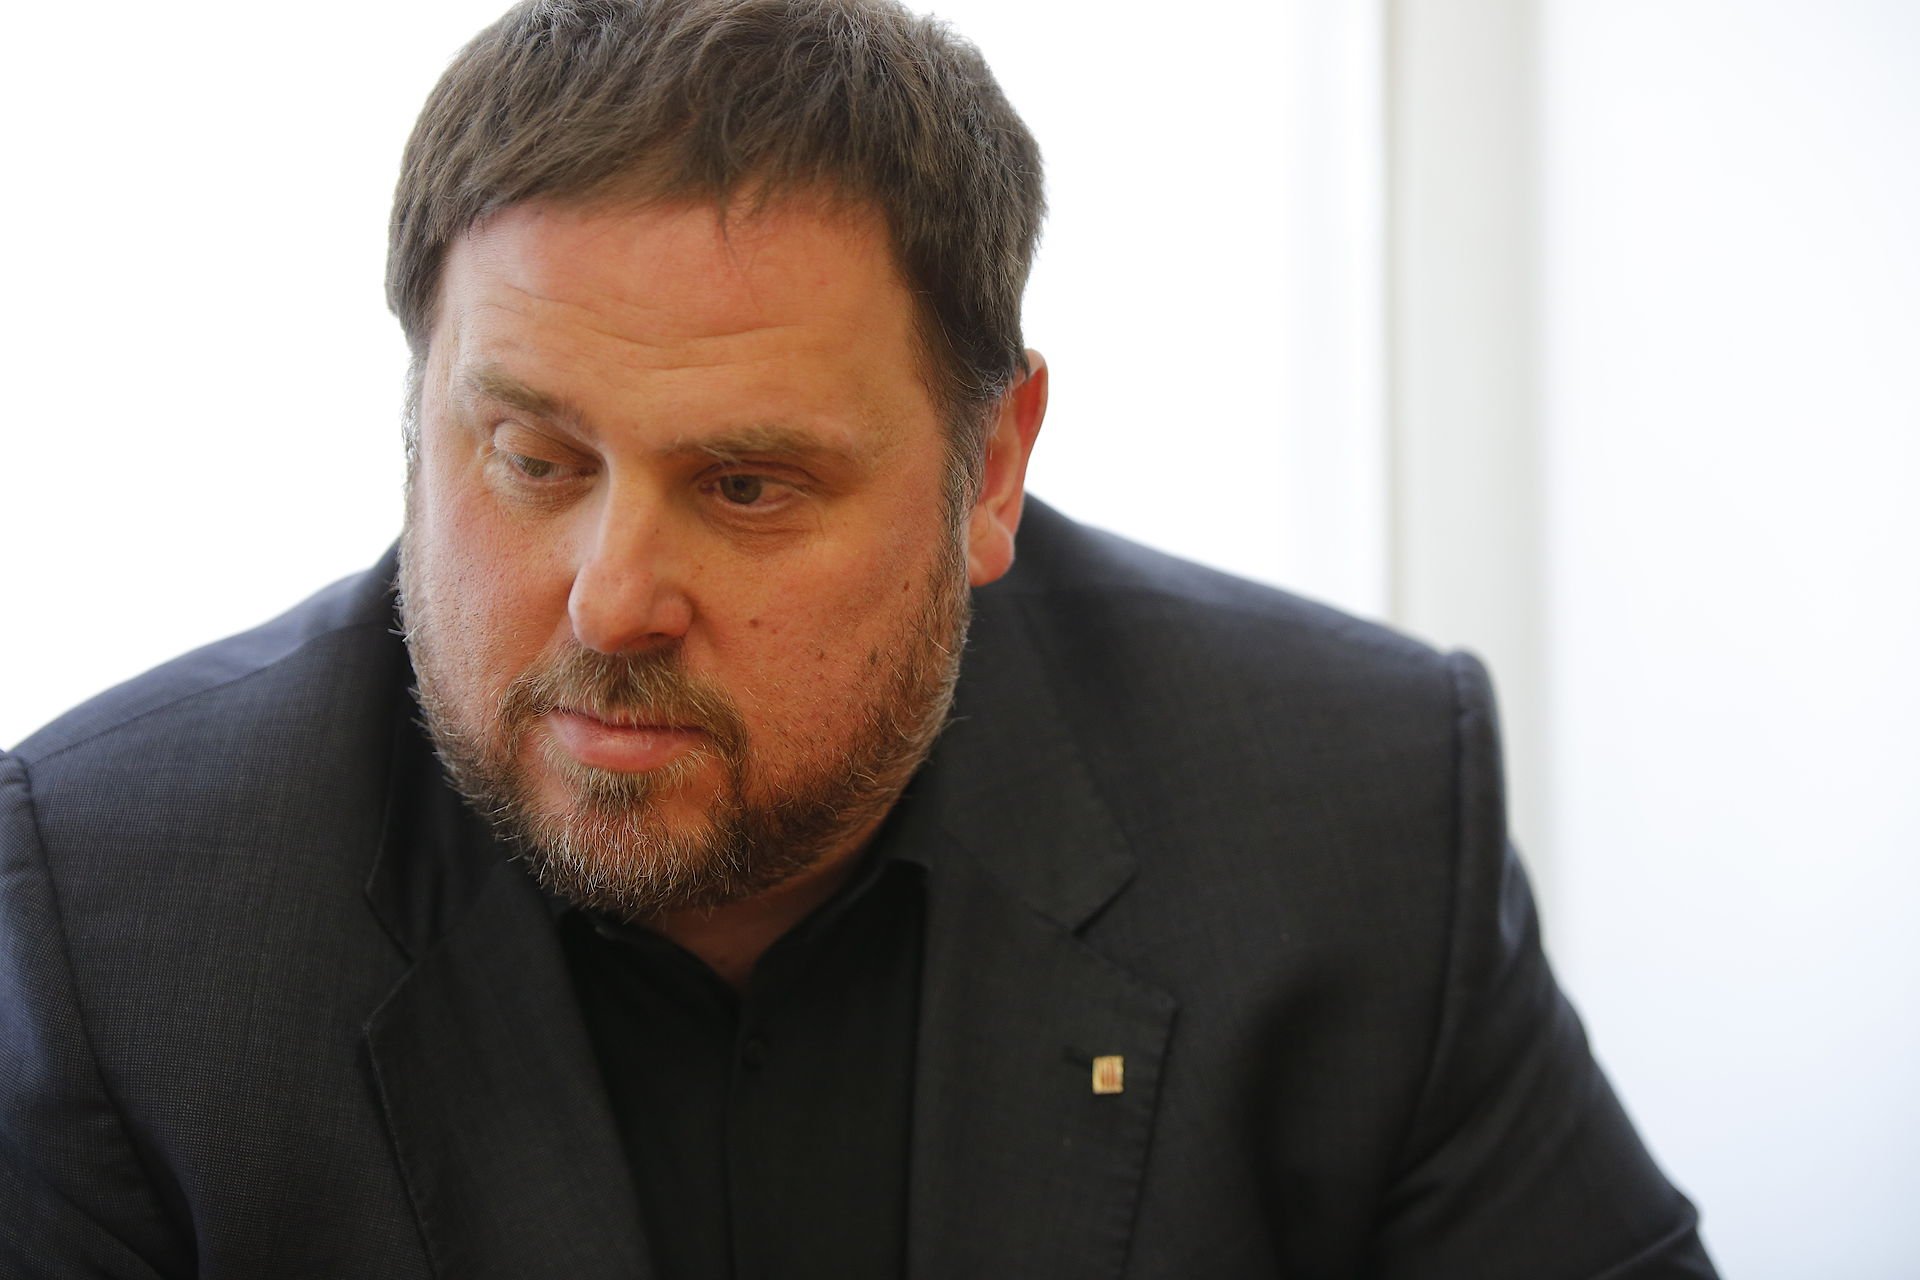 Spain's Supreme Court refuses to release Junqueras to take his seat as MEP